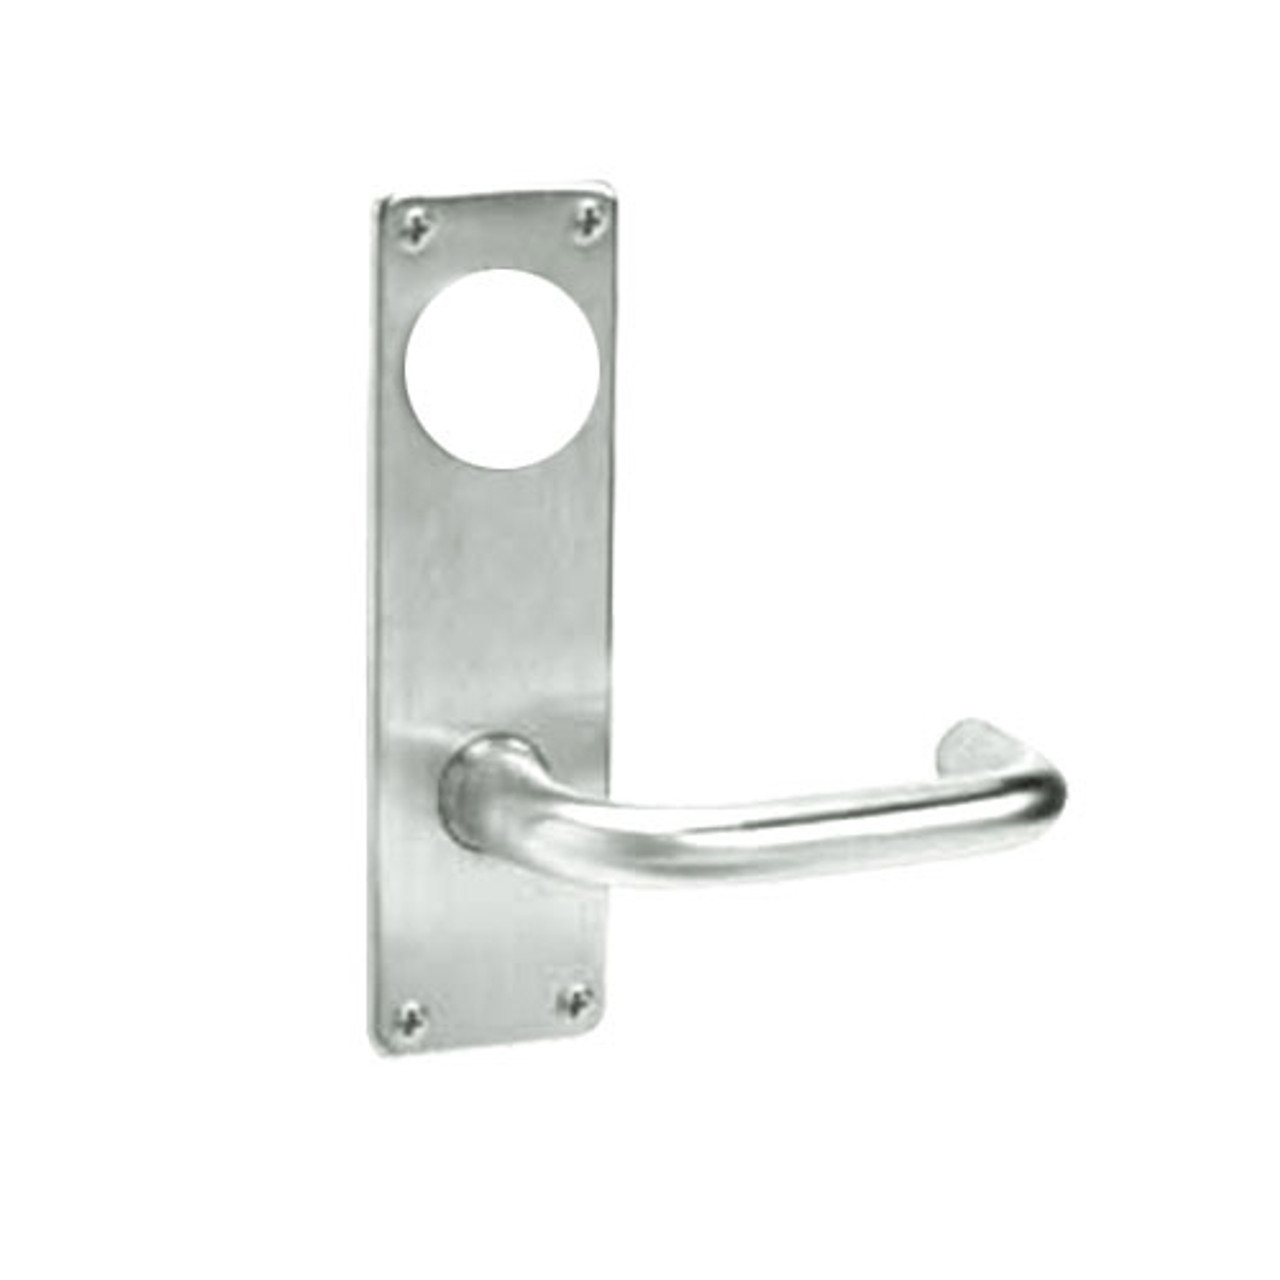 ML2065-LSN-618-LC Corbin Russwin ML2000 Series Mortise Dormitory Locksets with Lustra Lever in Bright Nickel